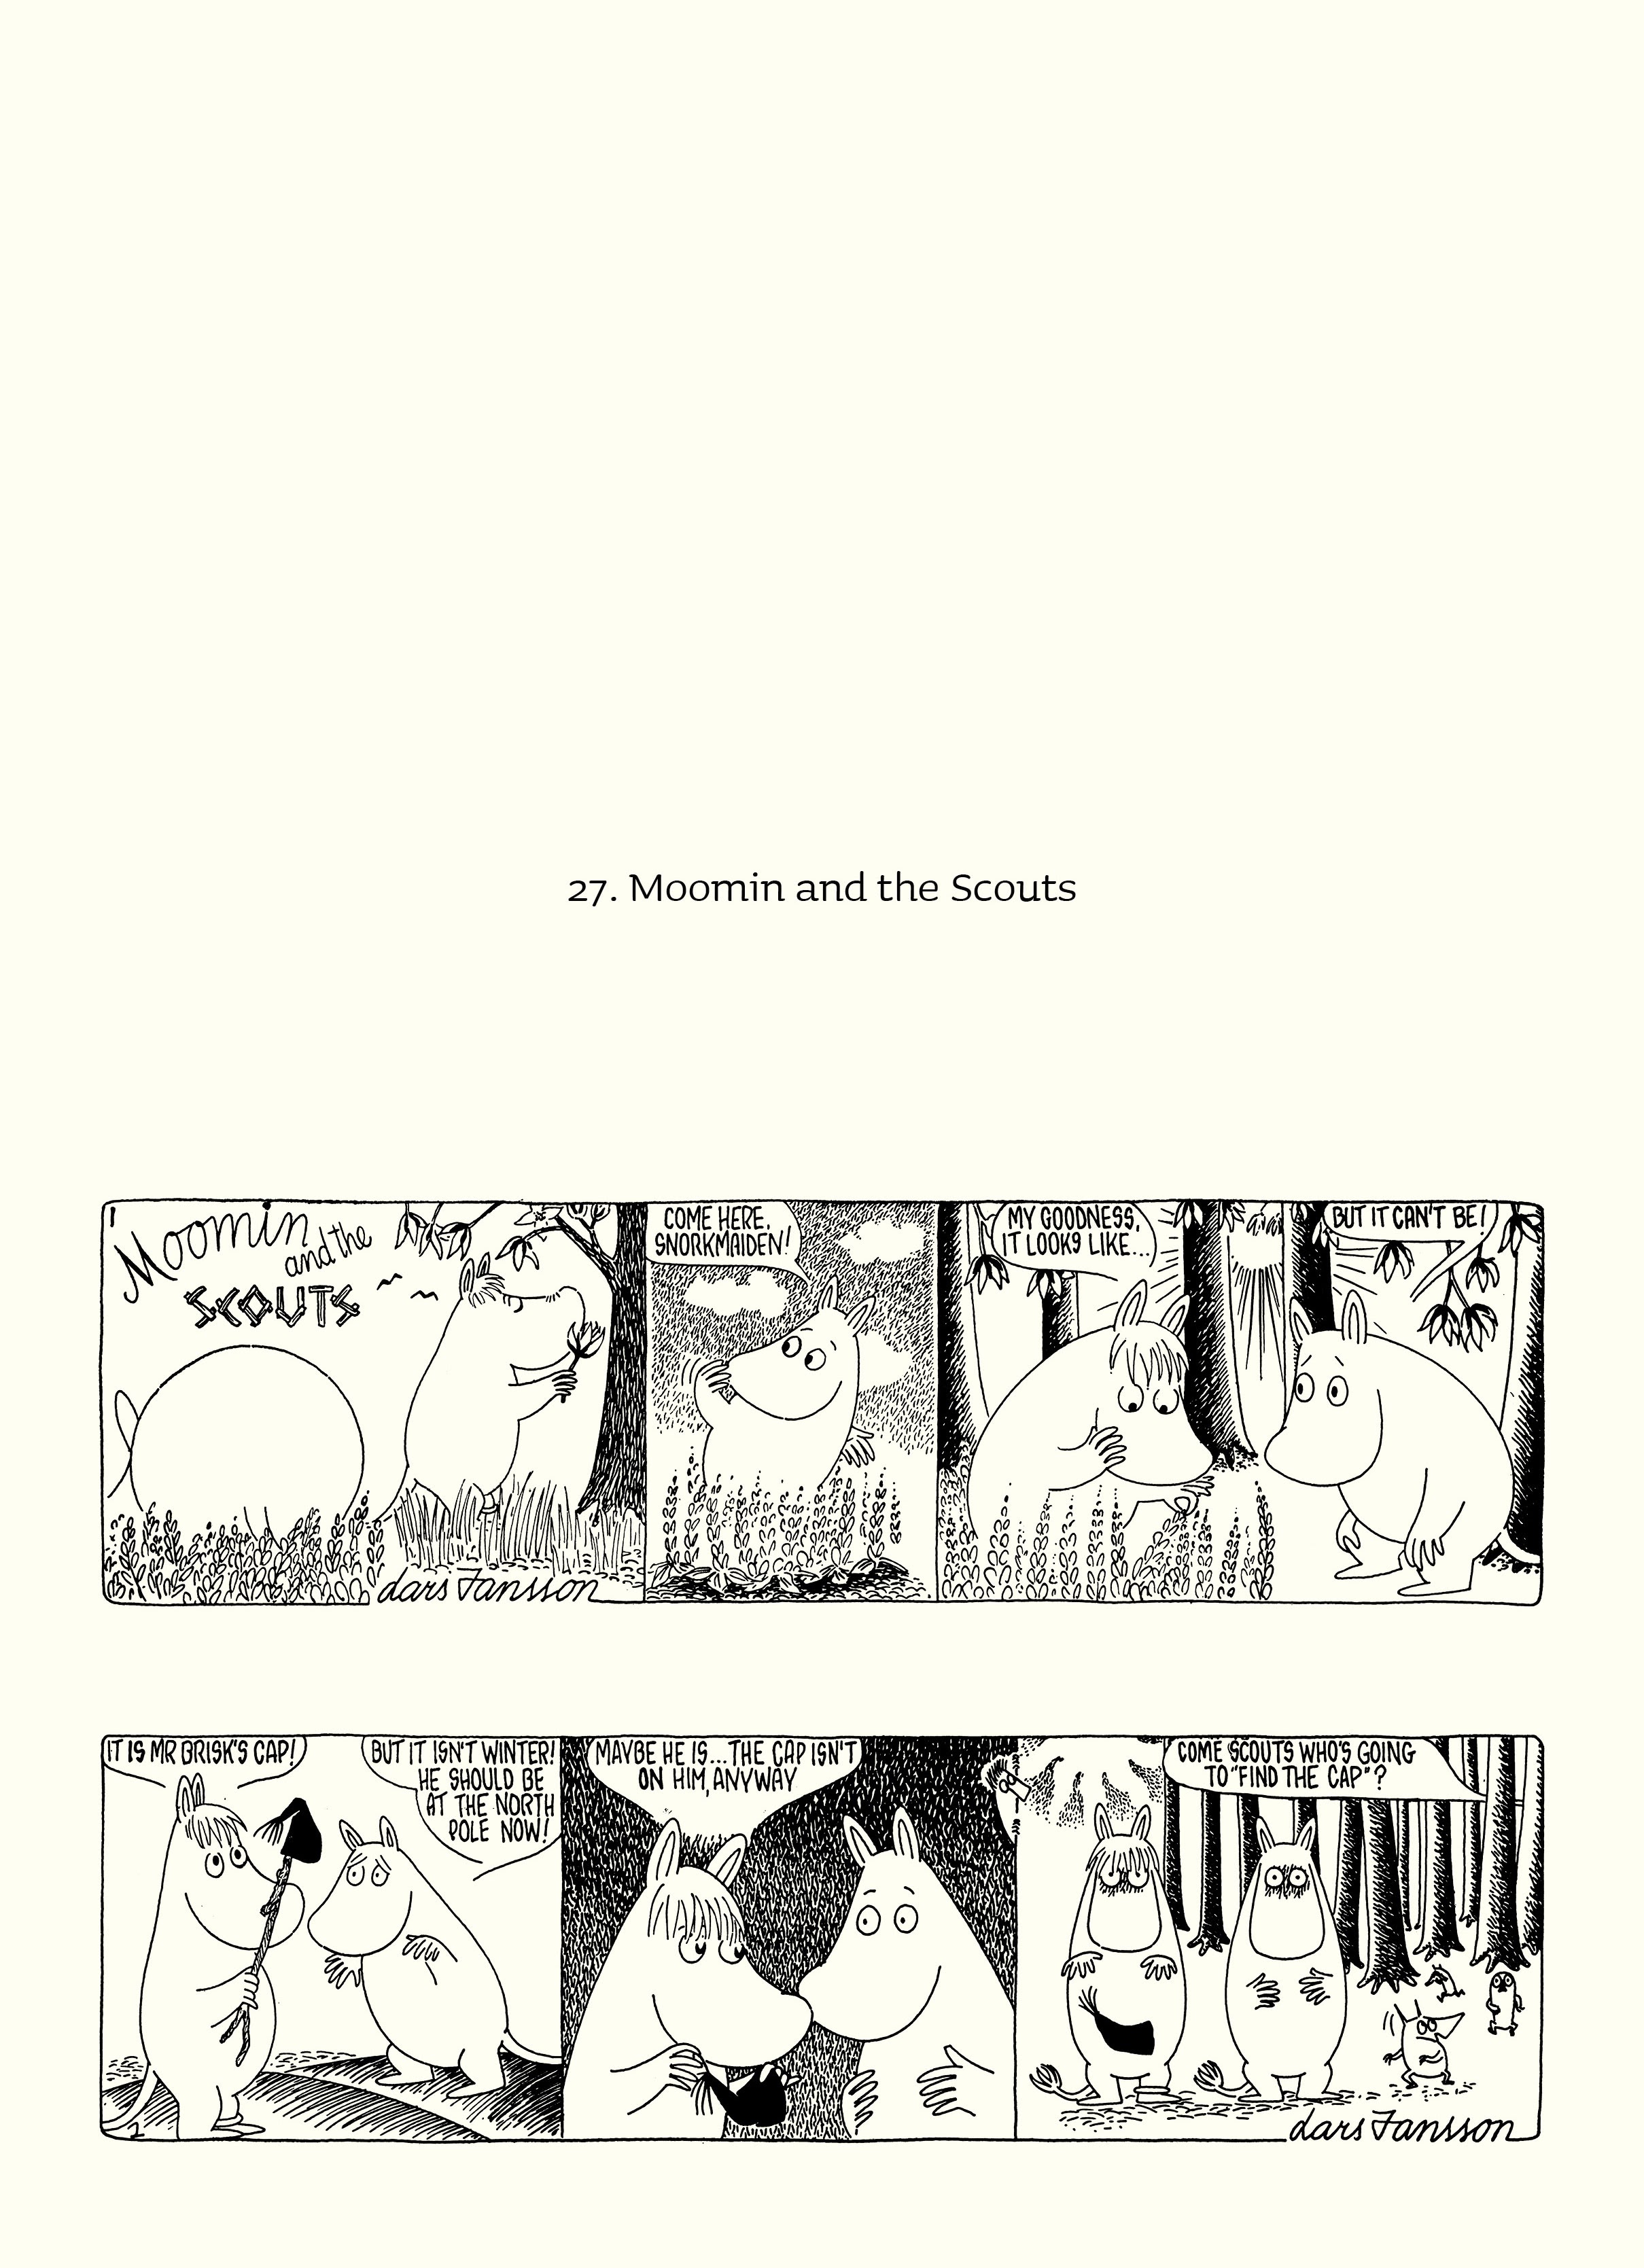 Read online Moomin: The Complete Lars Jansson Comic Strip comic -  Issue # TPB 7 - 27